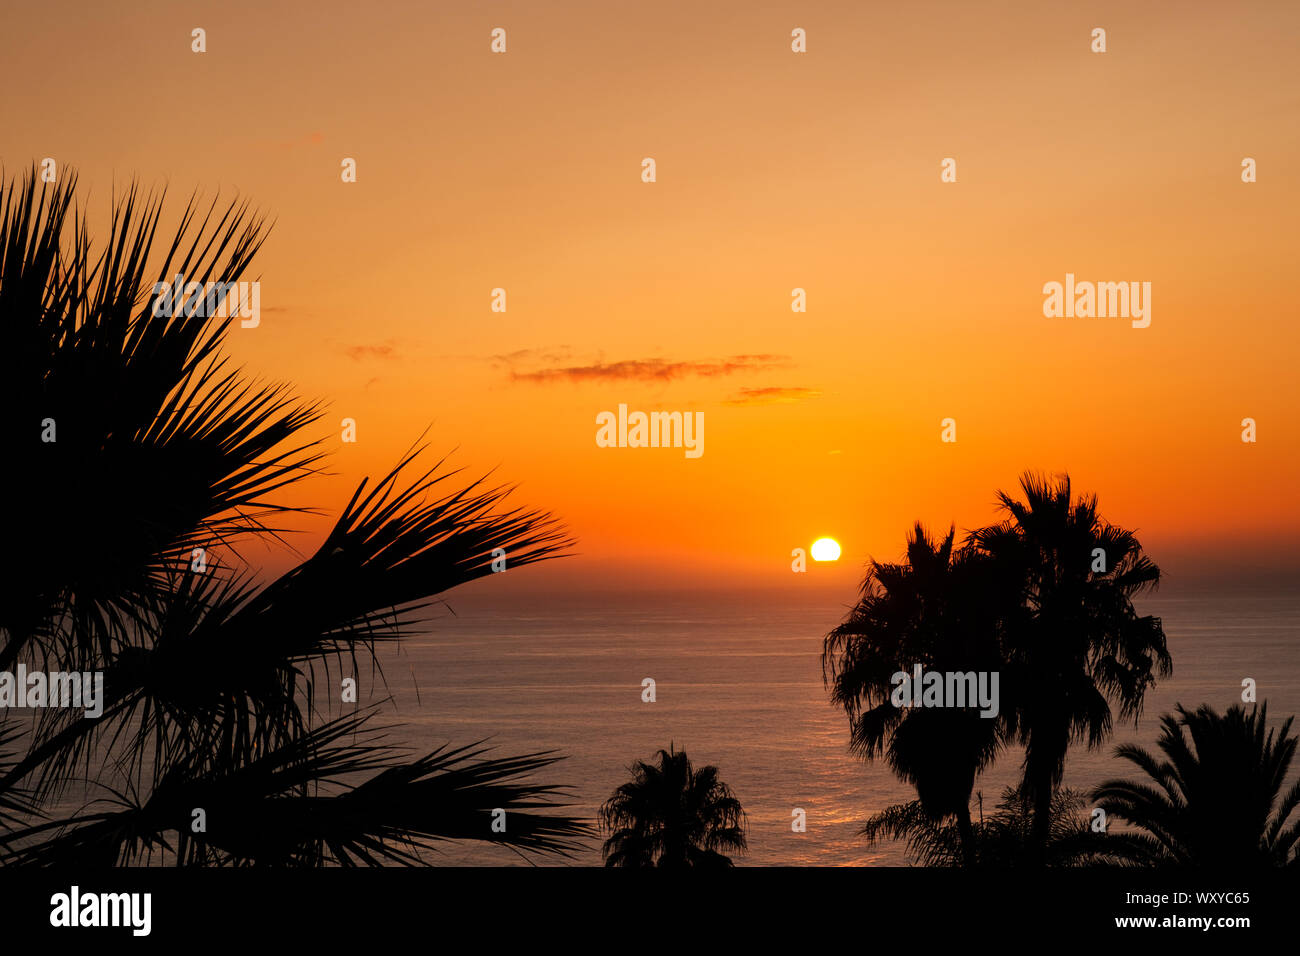 sunset sky over ocean water with palm trees Stock Photo